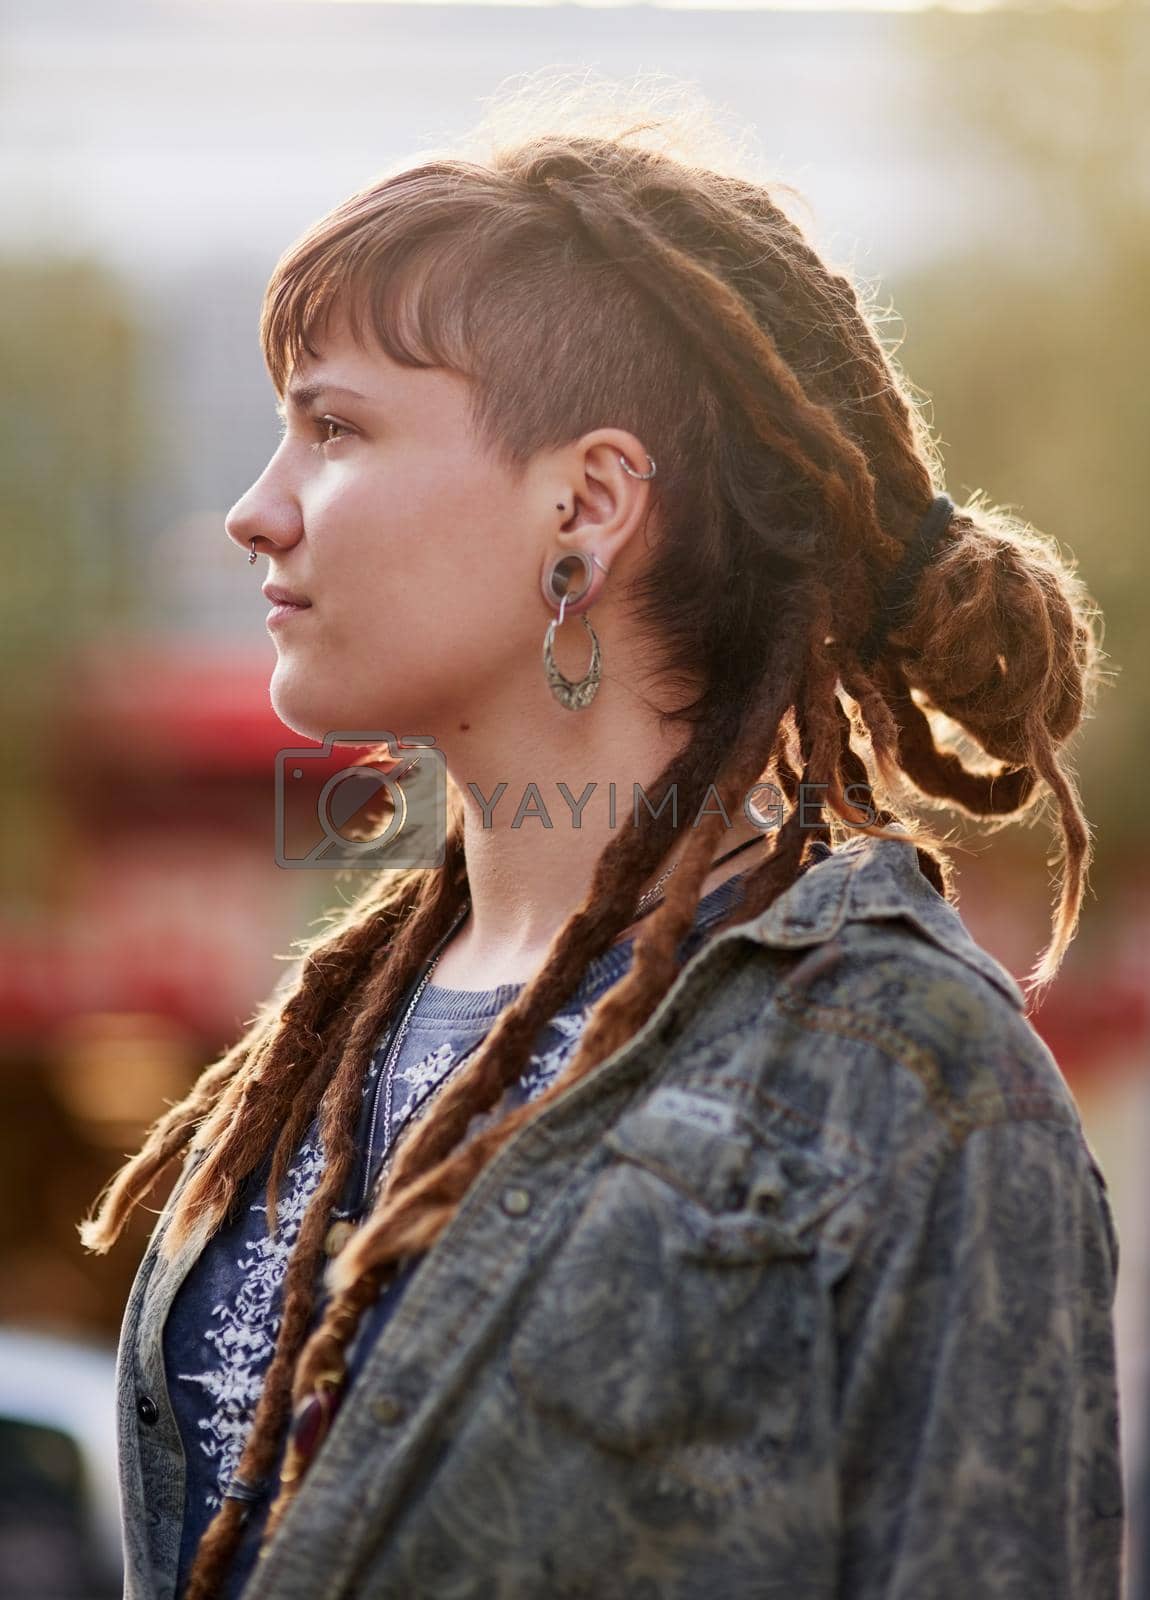 Royalty free image of On top of the latest trends. Shot of a young woman with dreadlocks and piercings posing outdoors. by YuriArcurs